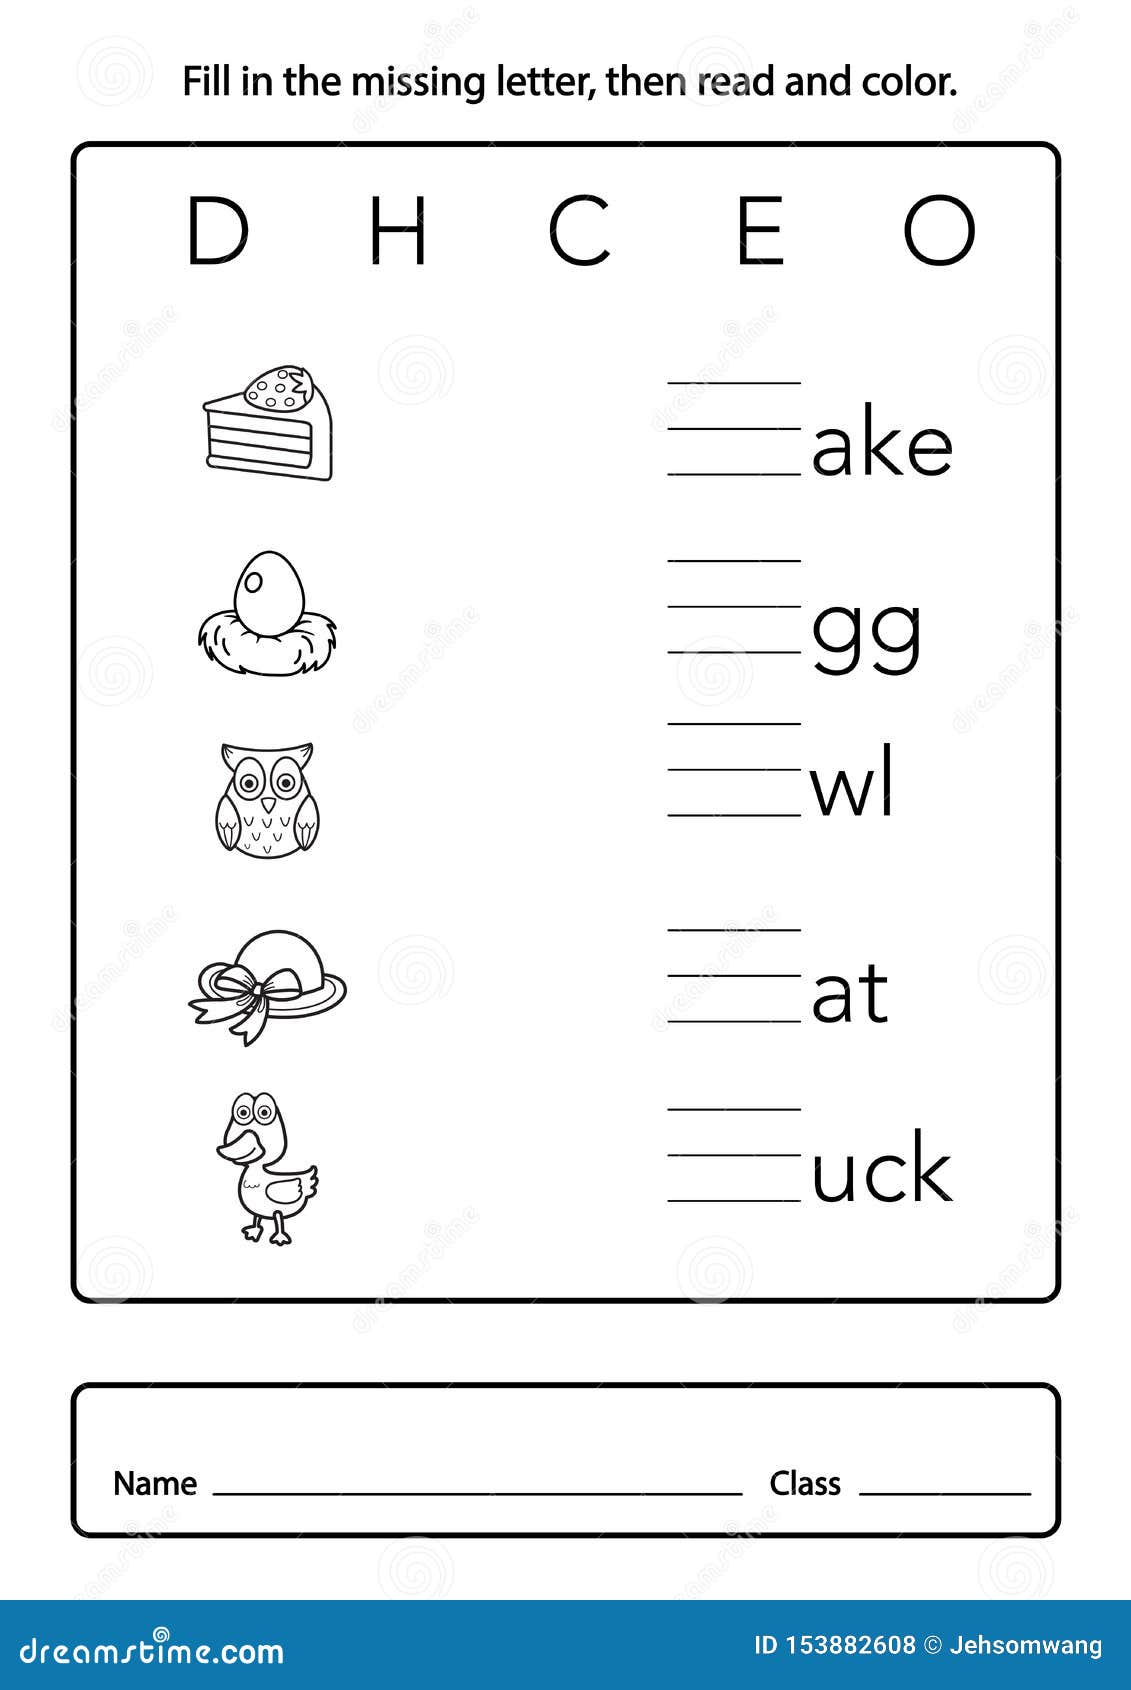 fill in the missing letter, then read and color